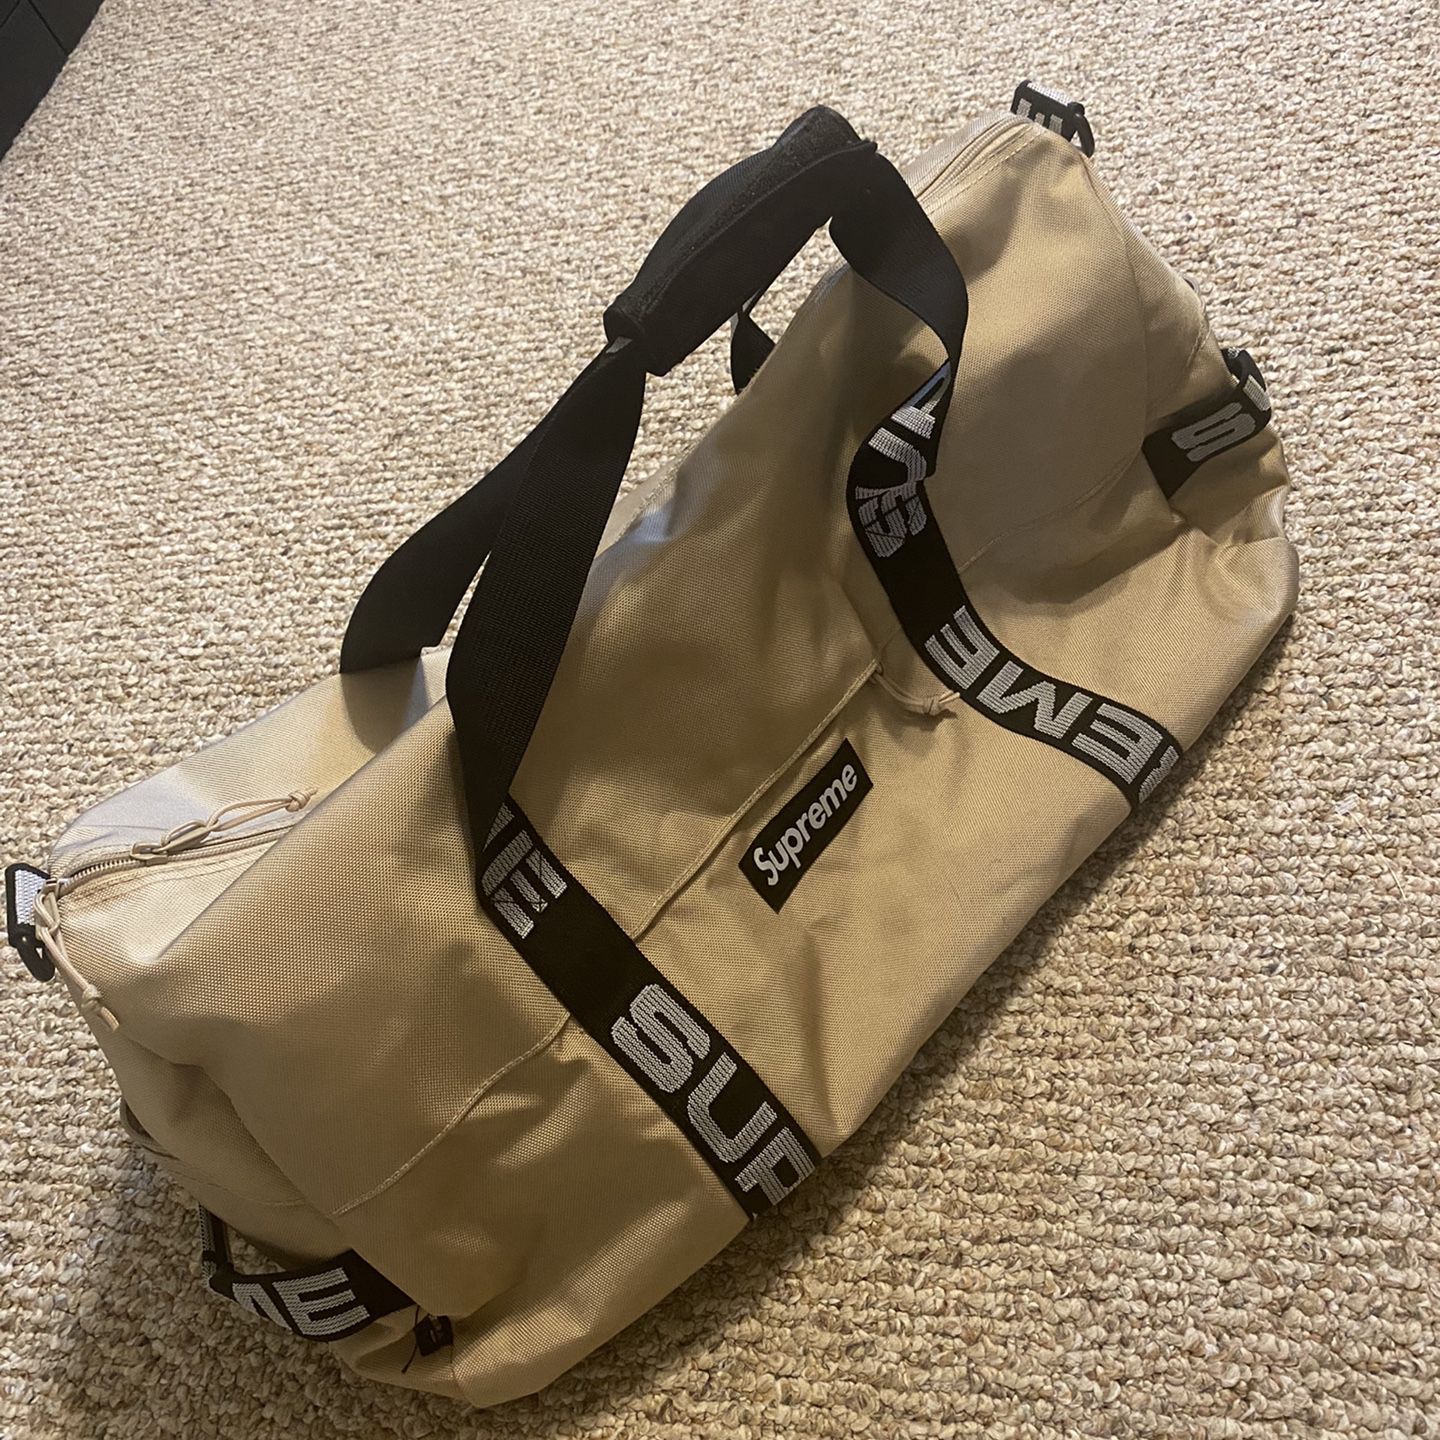 Supreme Duffle Bag (SS18) Tan for Sale in Huntington, NY - OfferUp